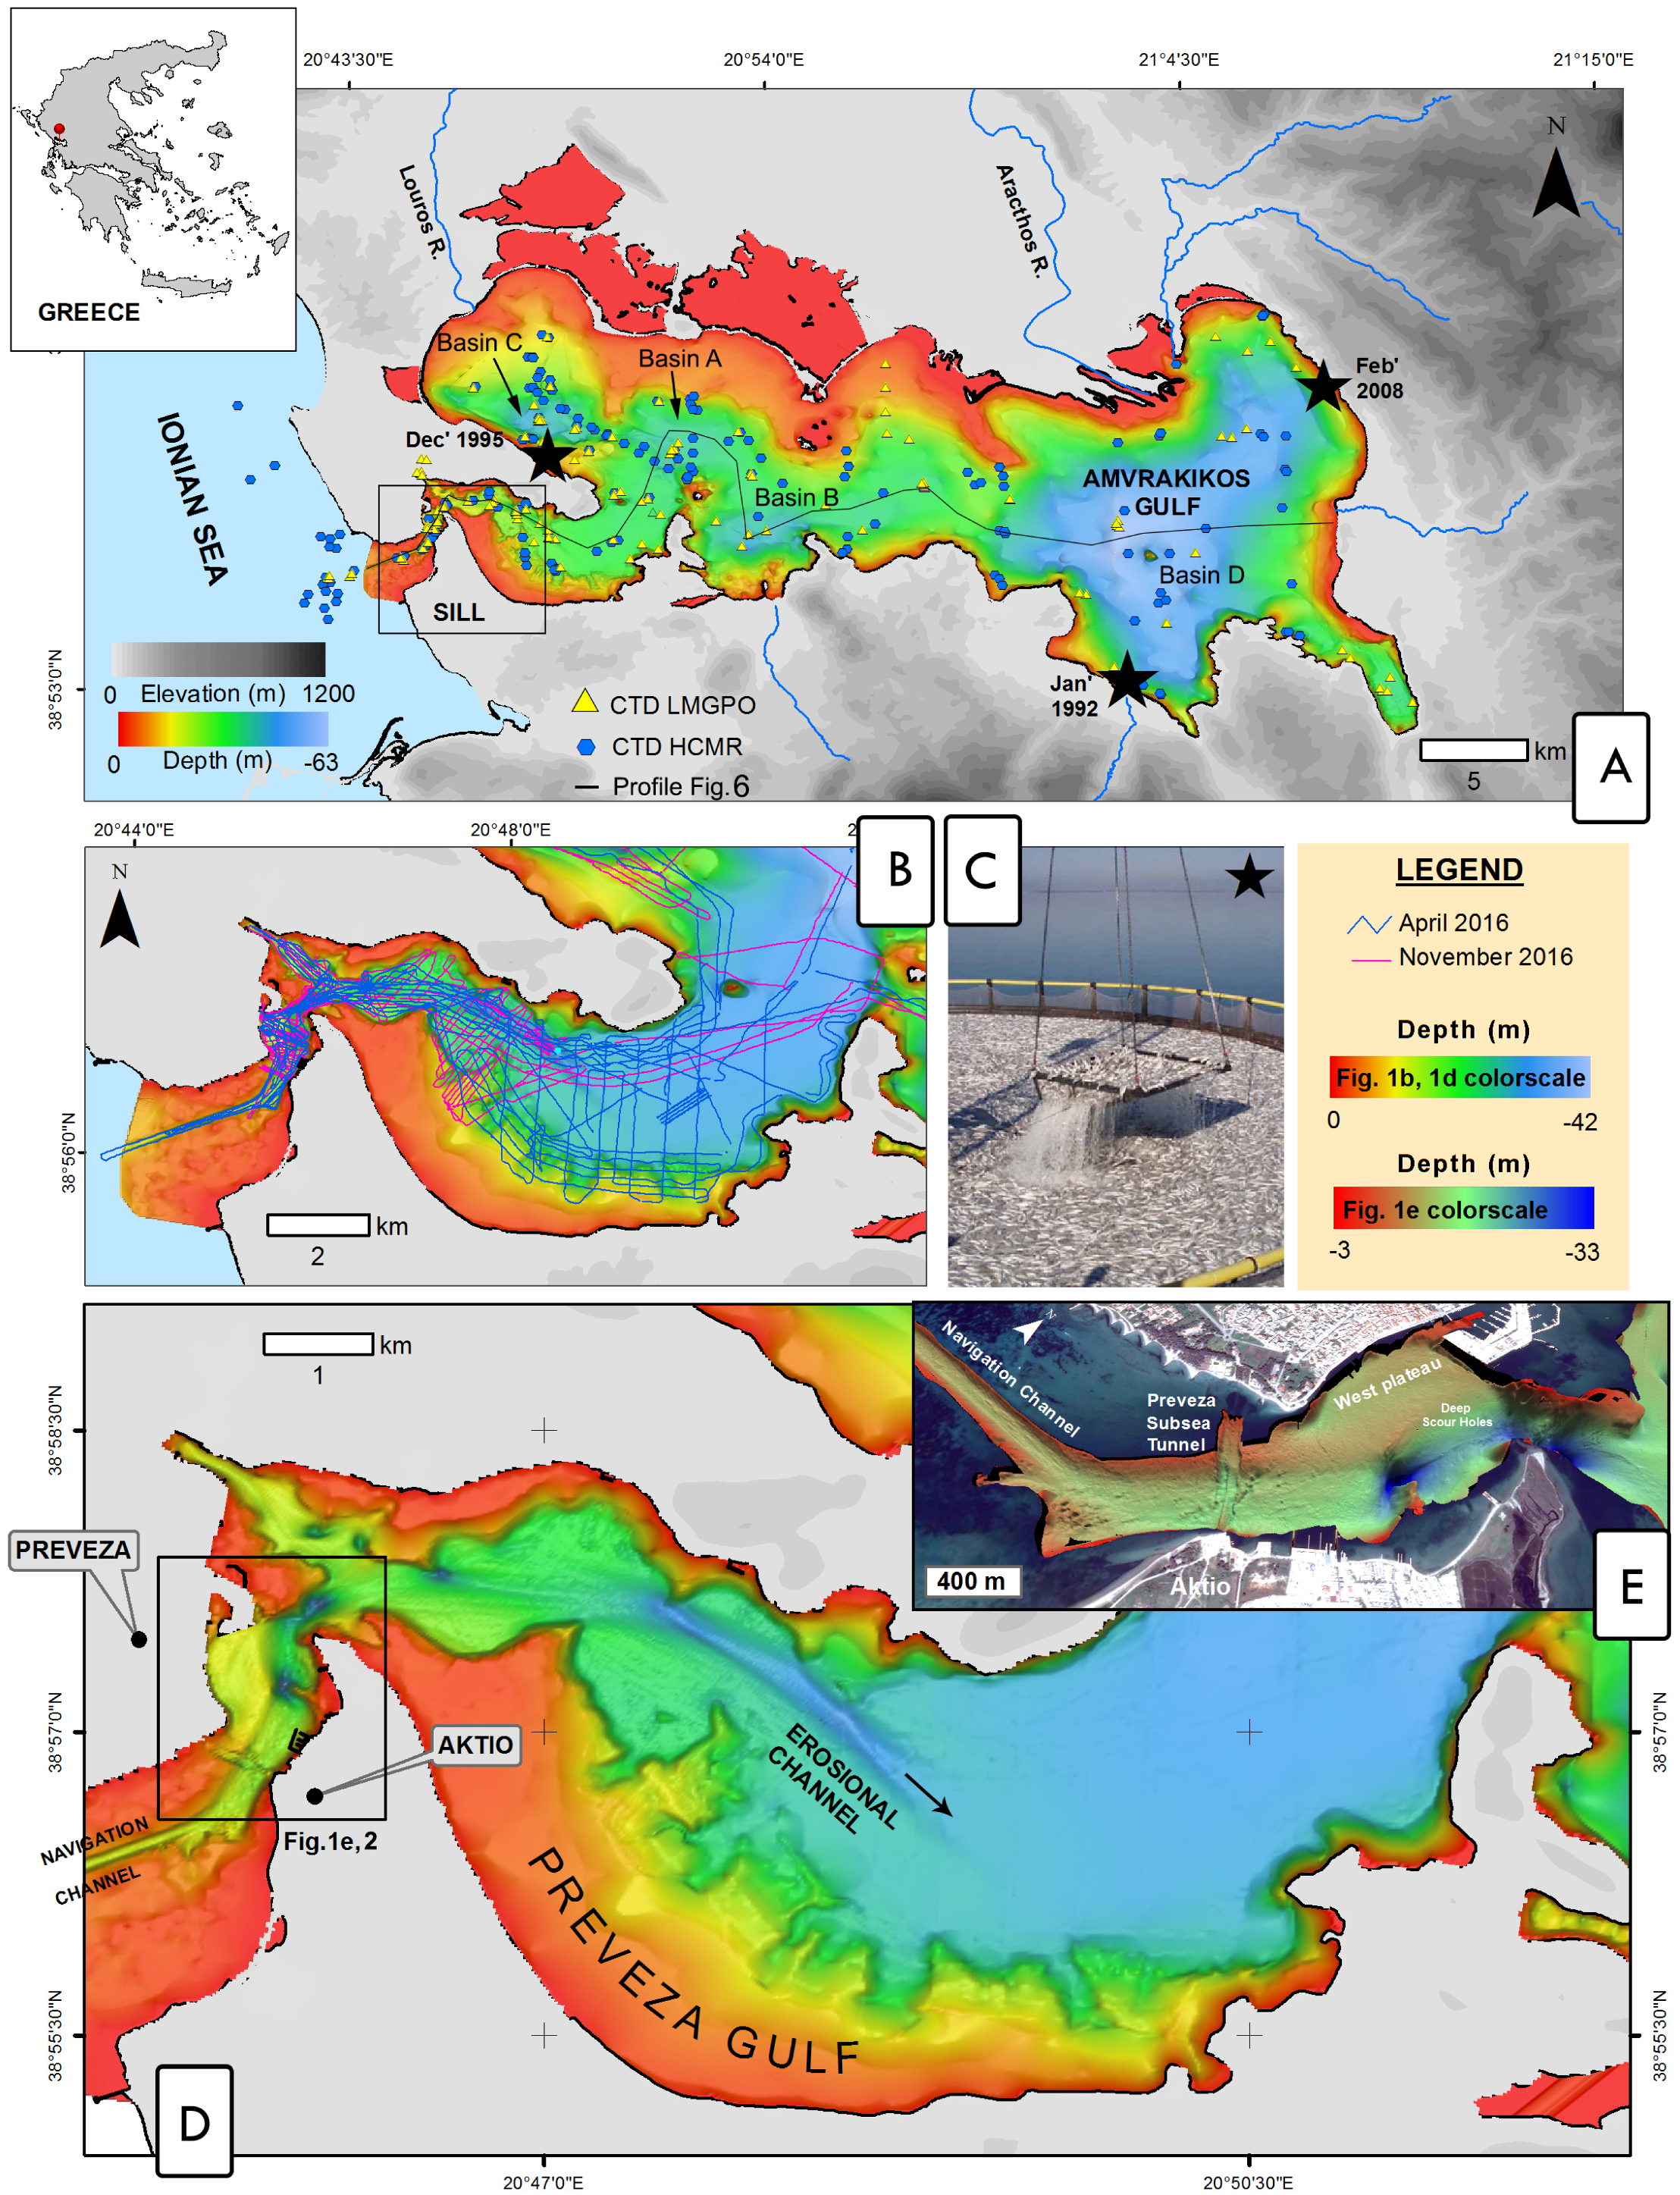 Geosciences | Free Full-Text | Spatio-Seasonal Hypoxia/Anoxia Dynamics and  Sill Circulation Patterns Linked to Natural Ventilation Drivers, in a  Mediterranean Landlocked Embayment: Amvrakikos Gulf, Greece | HTML